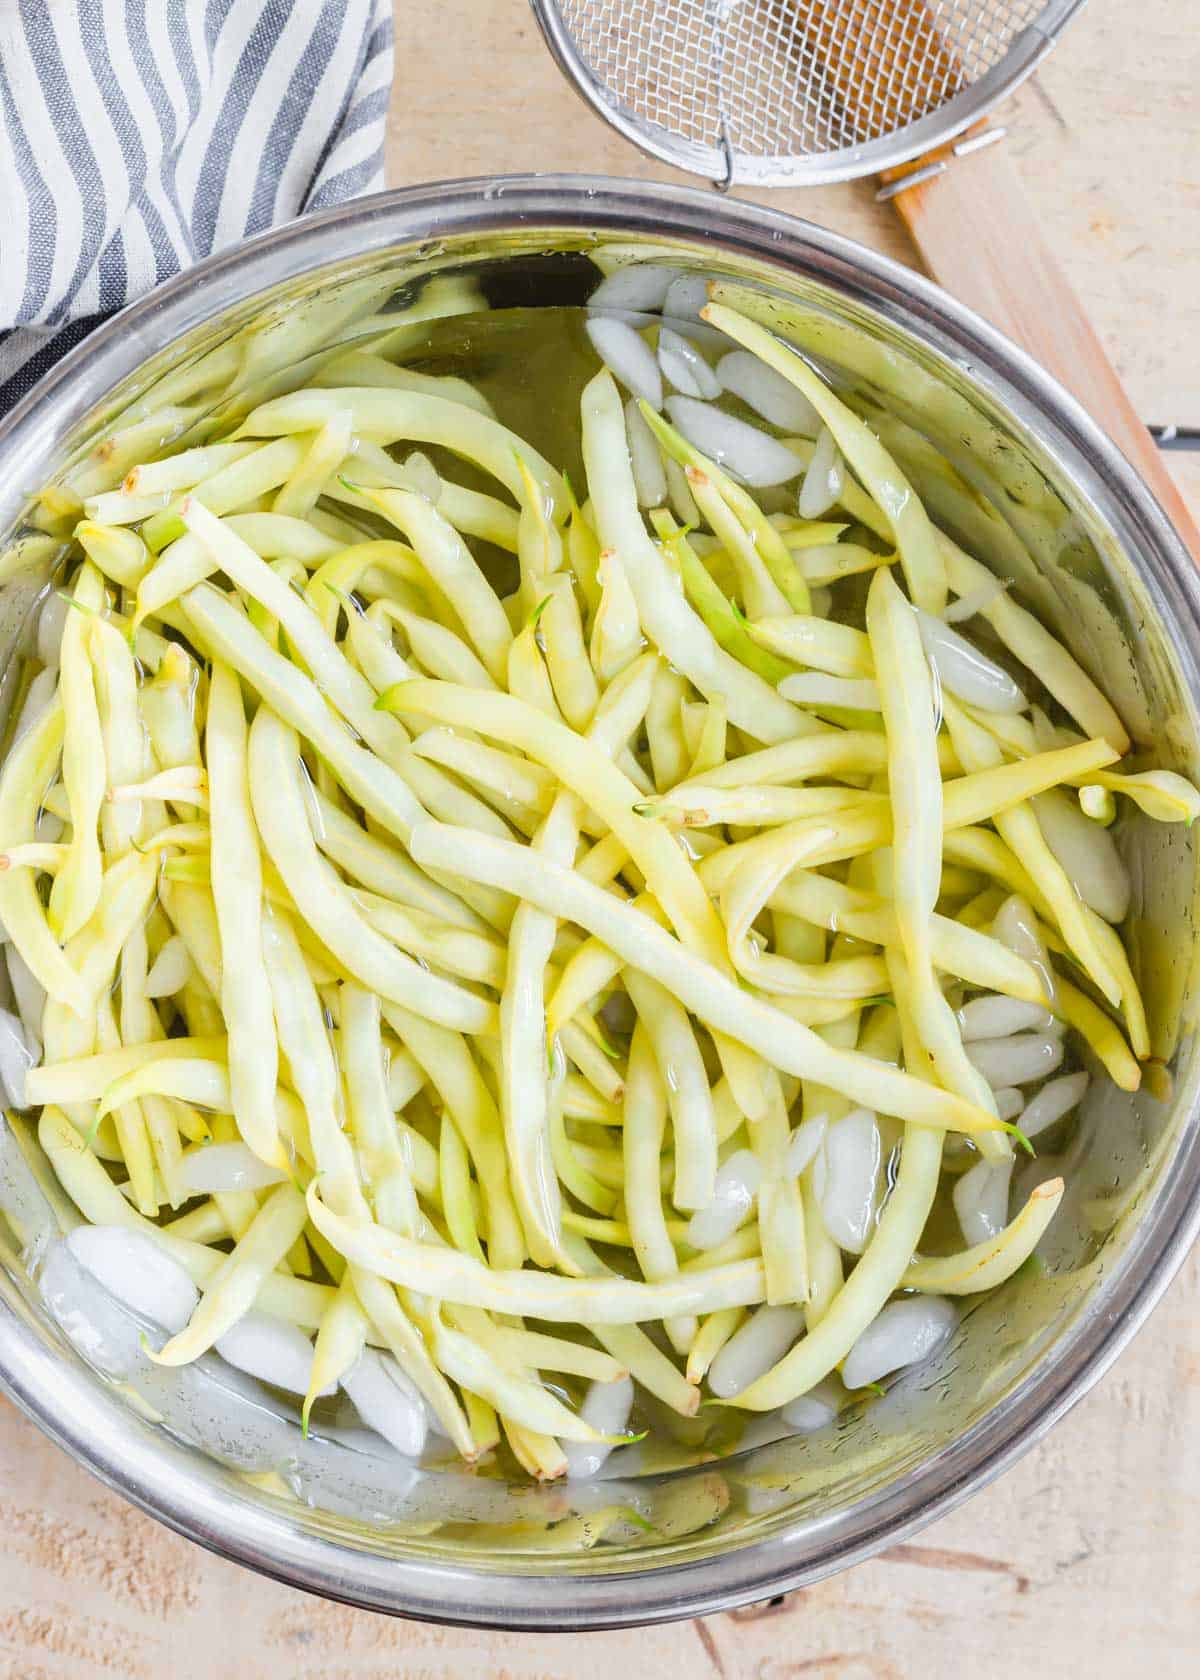 Blanched wax beans in a metal bowl with ice water.